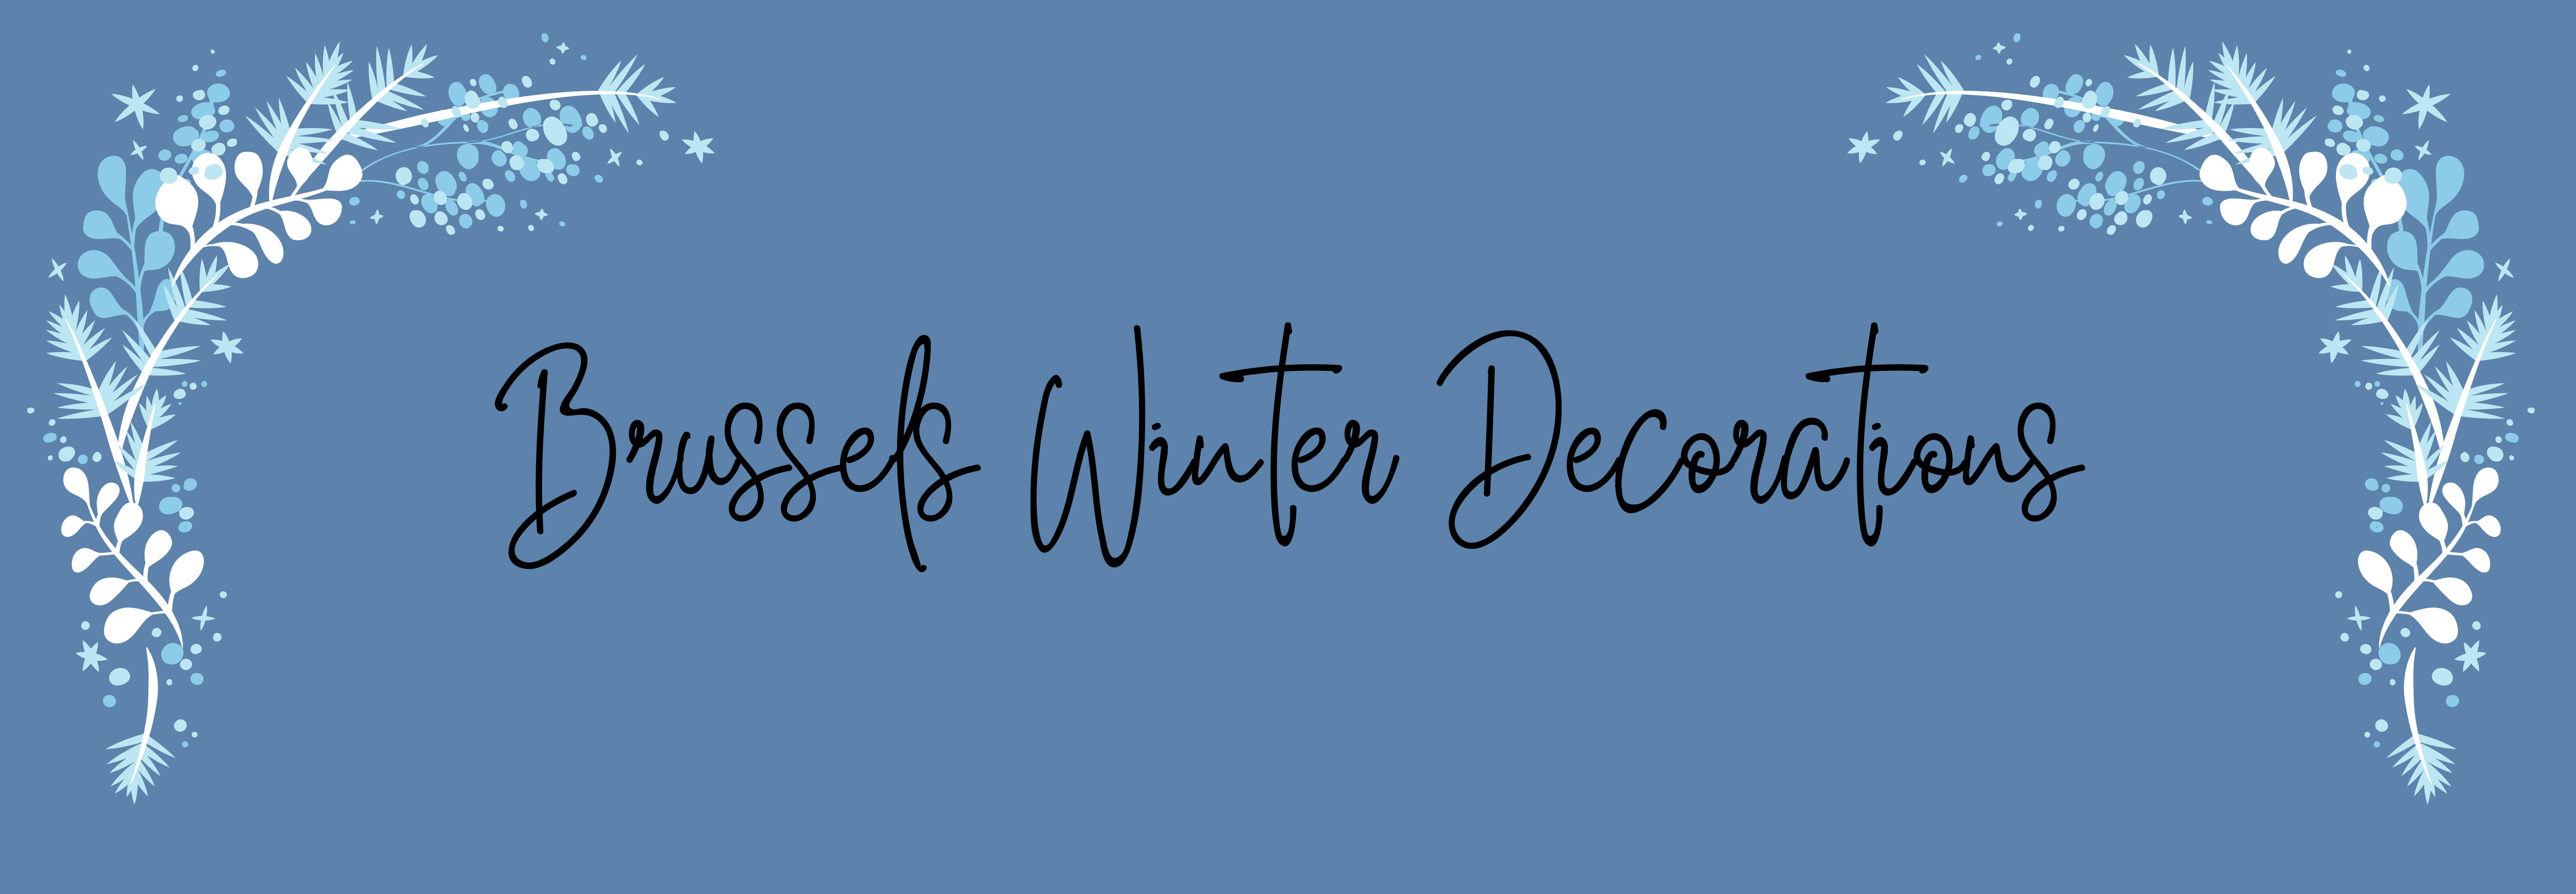 A blue picture with some winter type design that says "Brussels Winter Decorations"